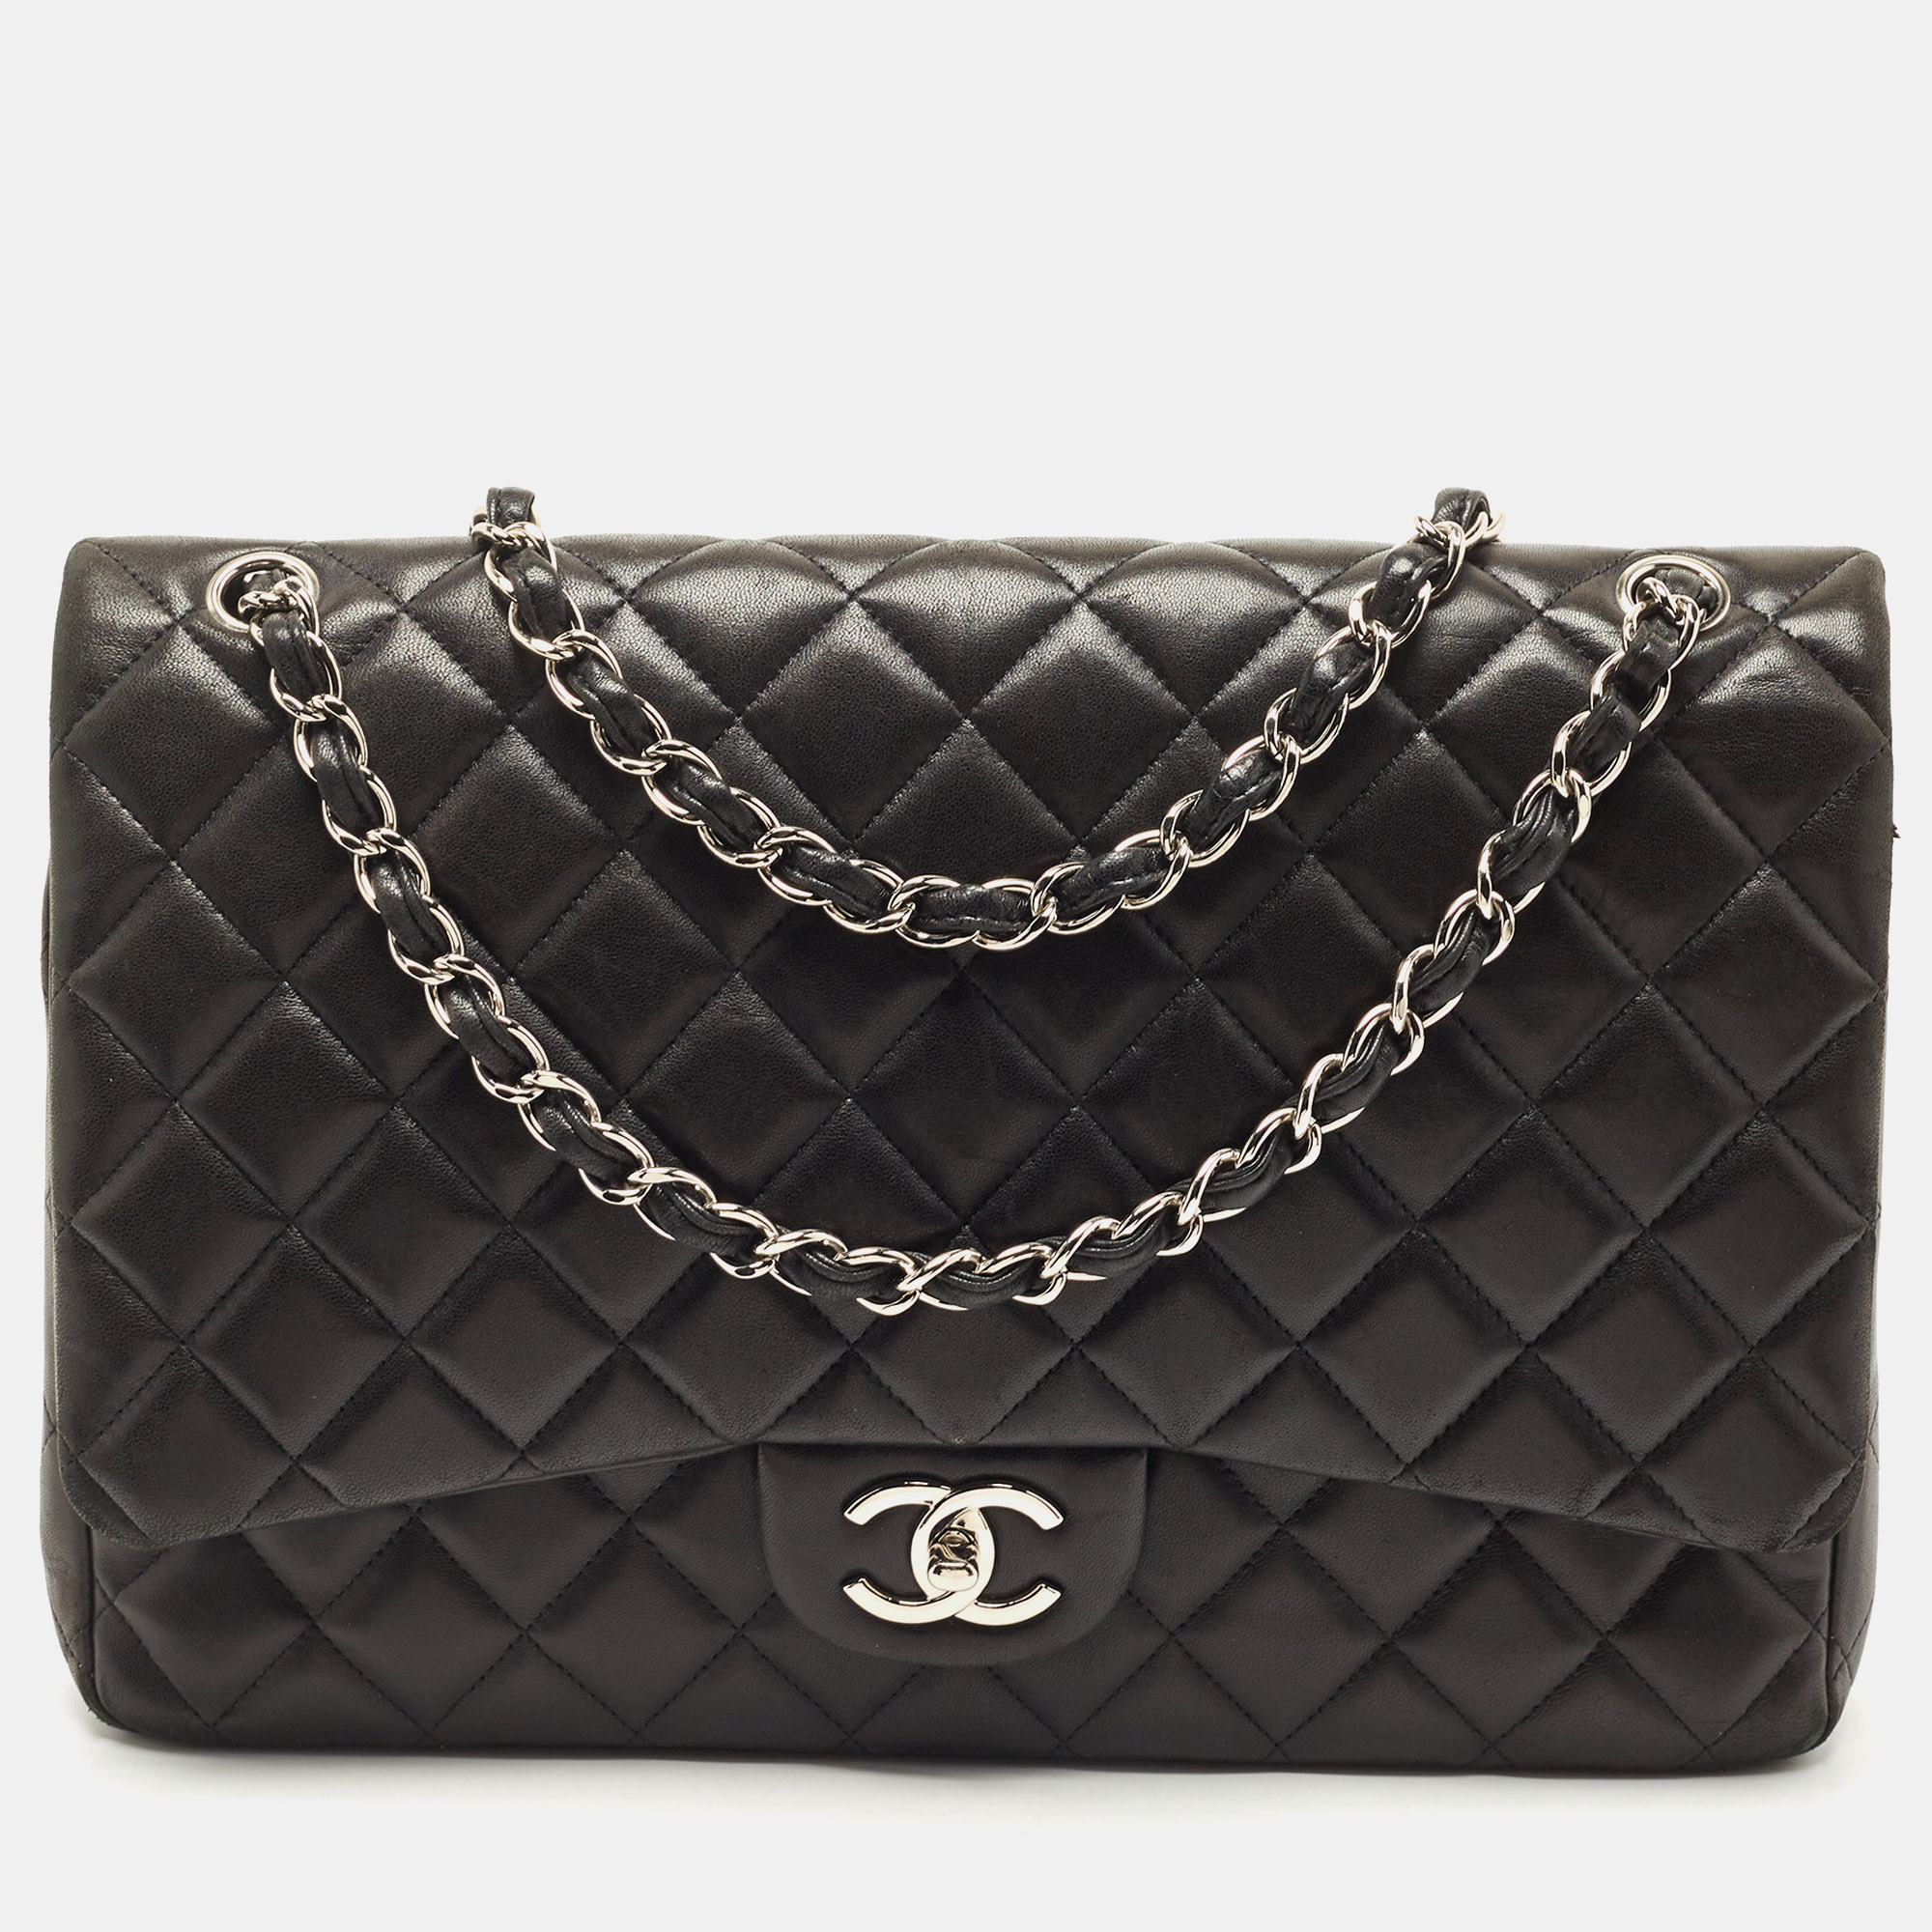 Pre-owned Chanel Black Quilted Lambskin Leather Maxi Classic Double Flap Bag